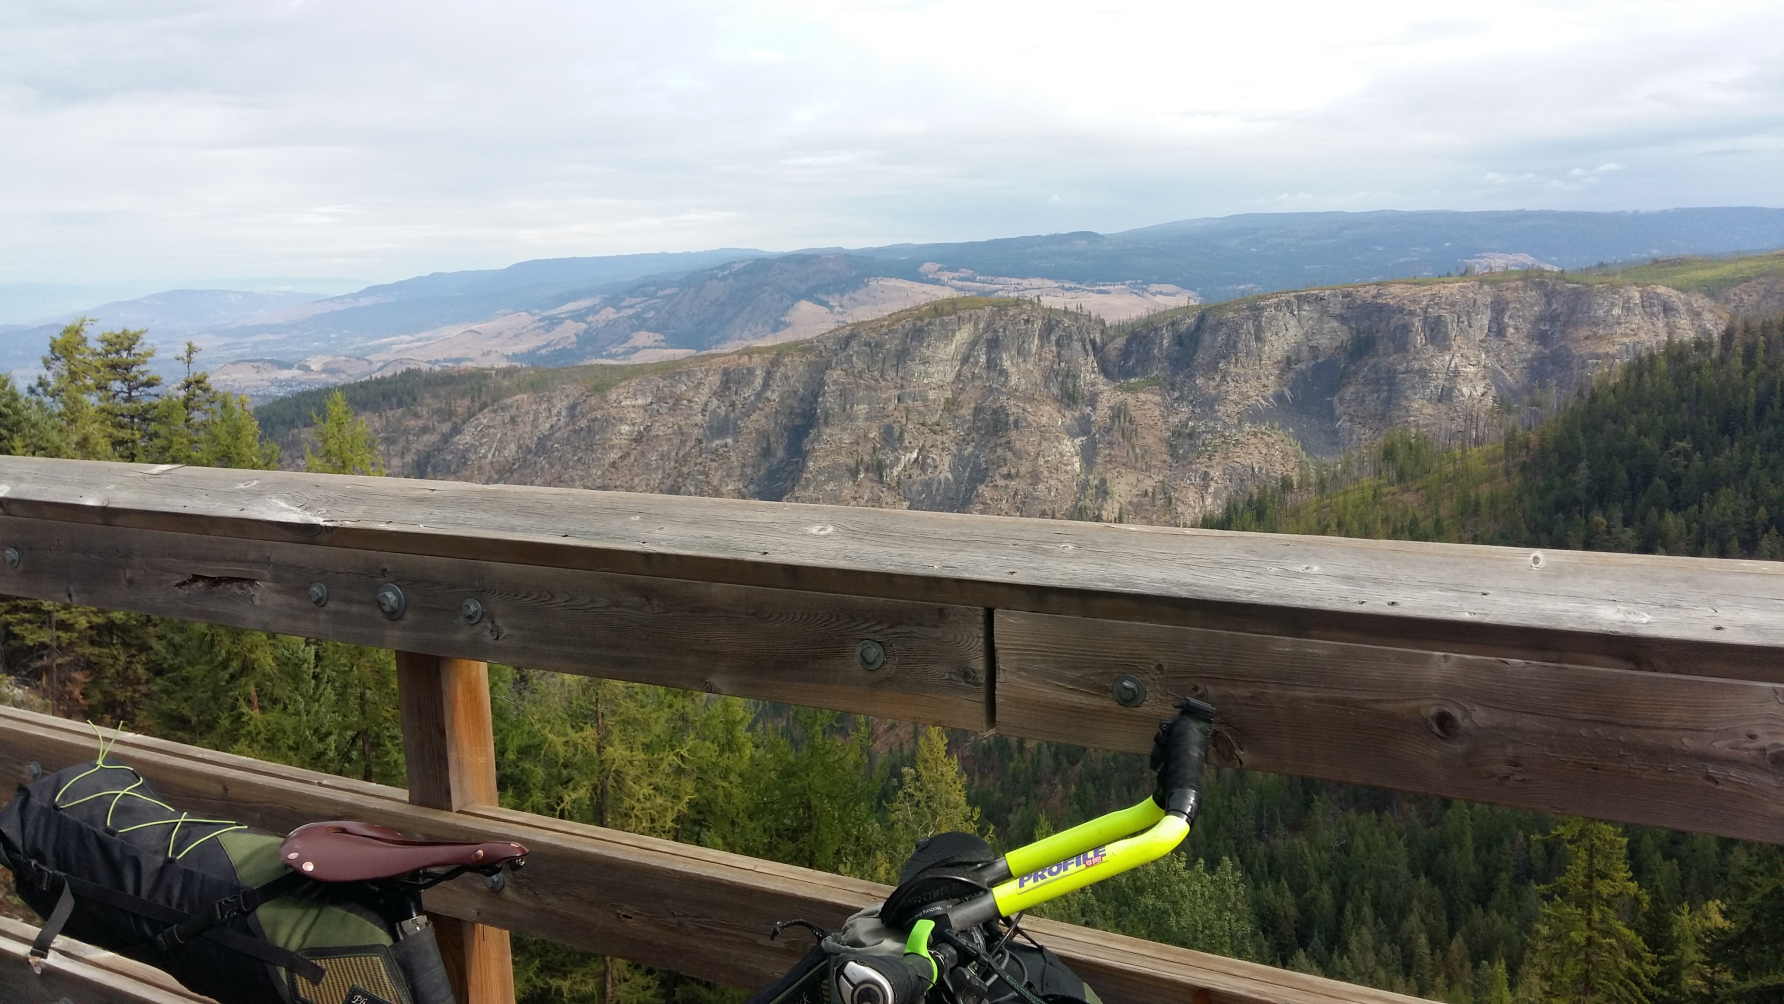  View from trestle in Myra Canyon 